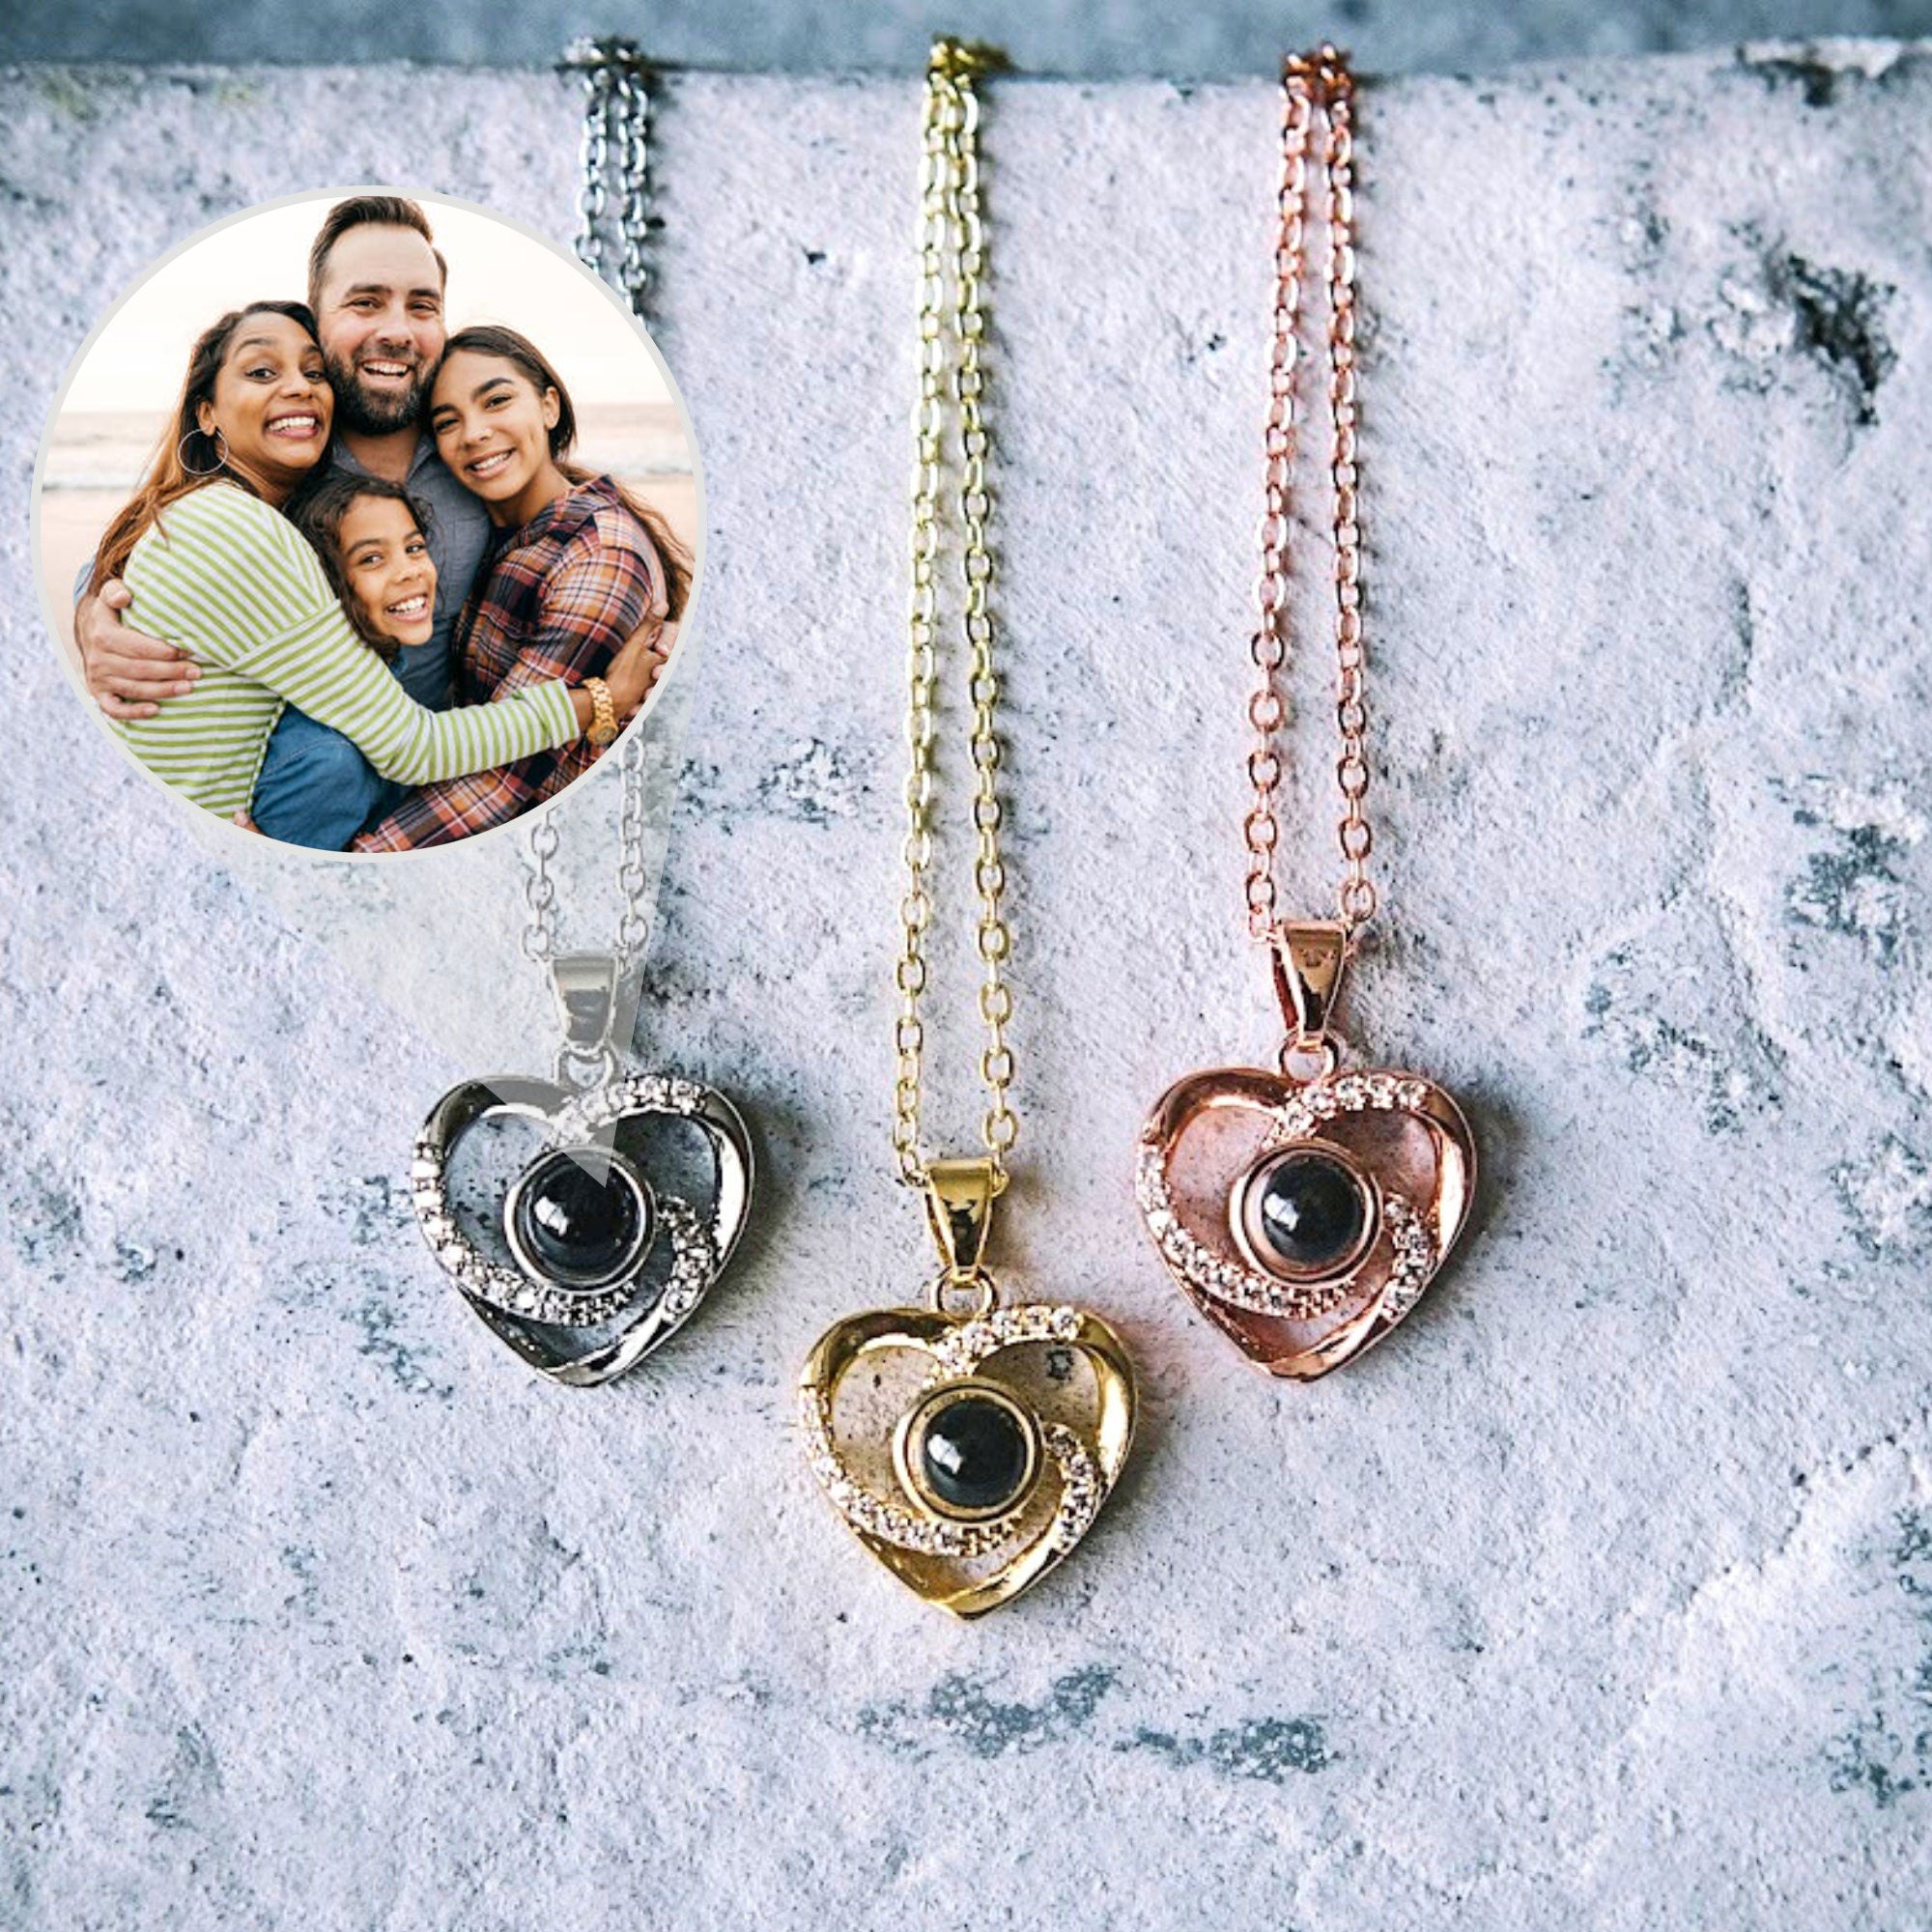 Custom Photo Projection Necklace, Personalized Memorial Picture Necklace